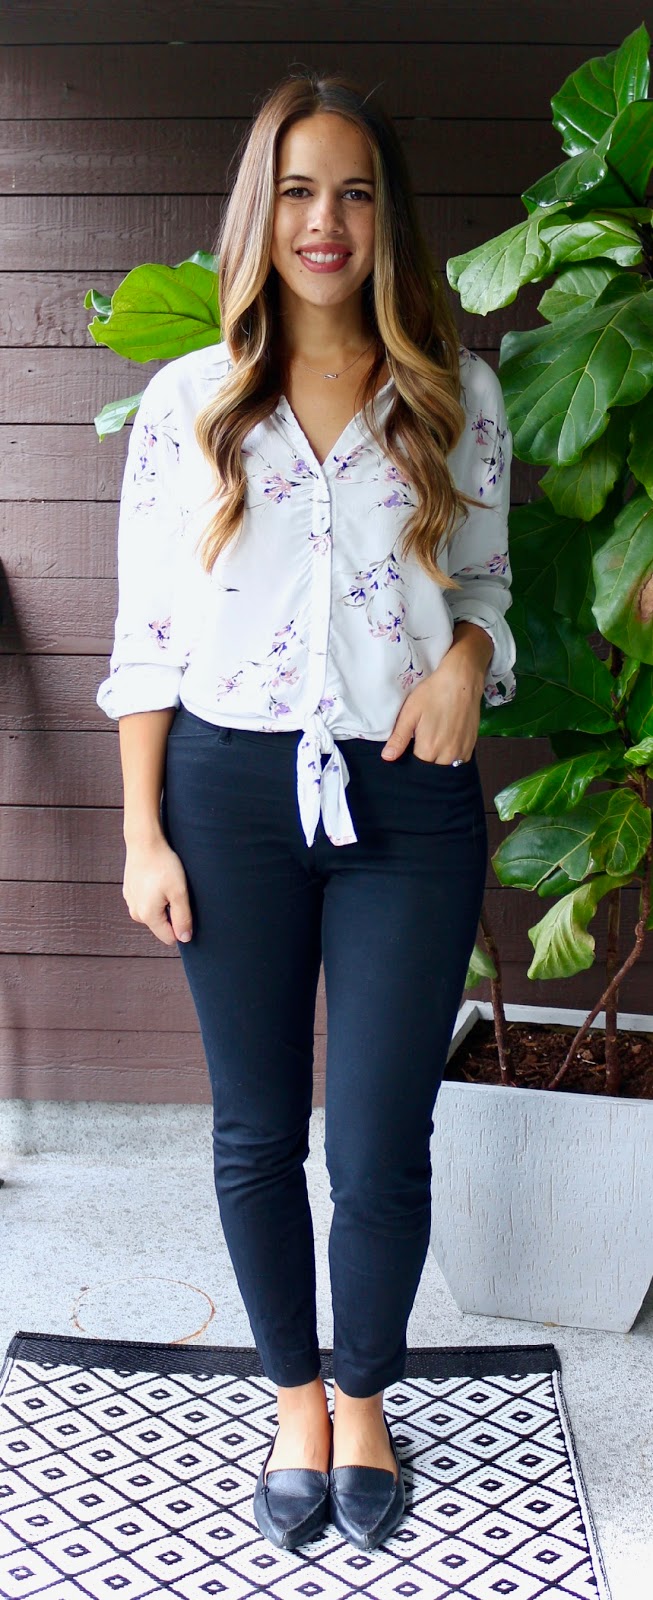 Jules in Flats - Tie-Front Floral Blouse (Business Casual Fall Workwear on a Budget) 